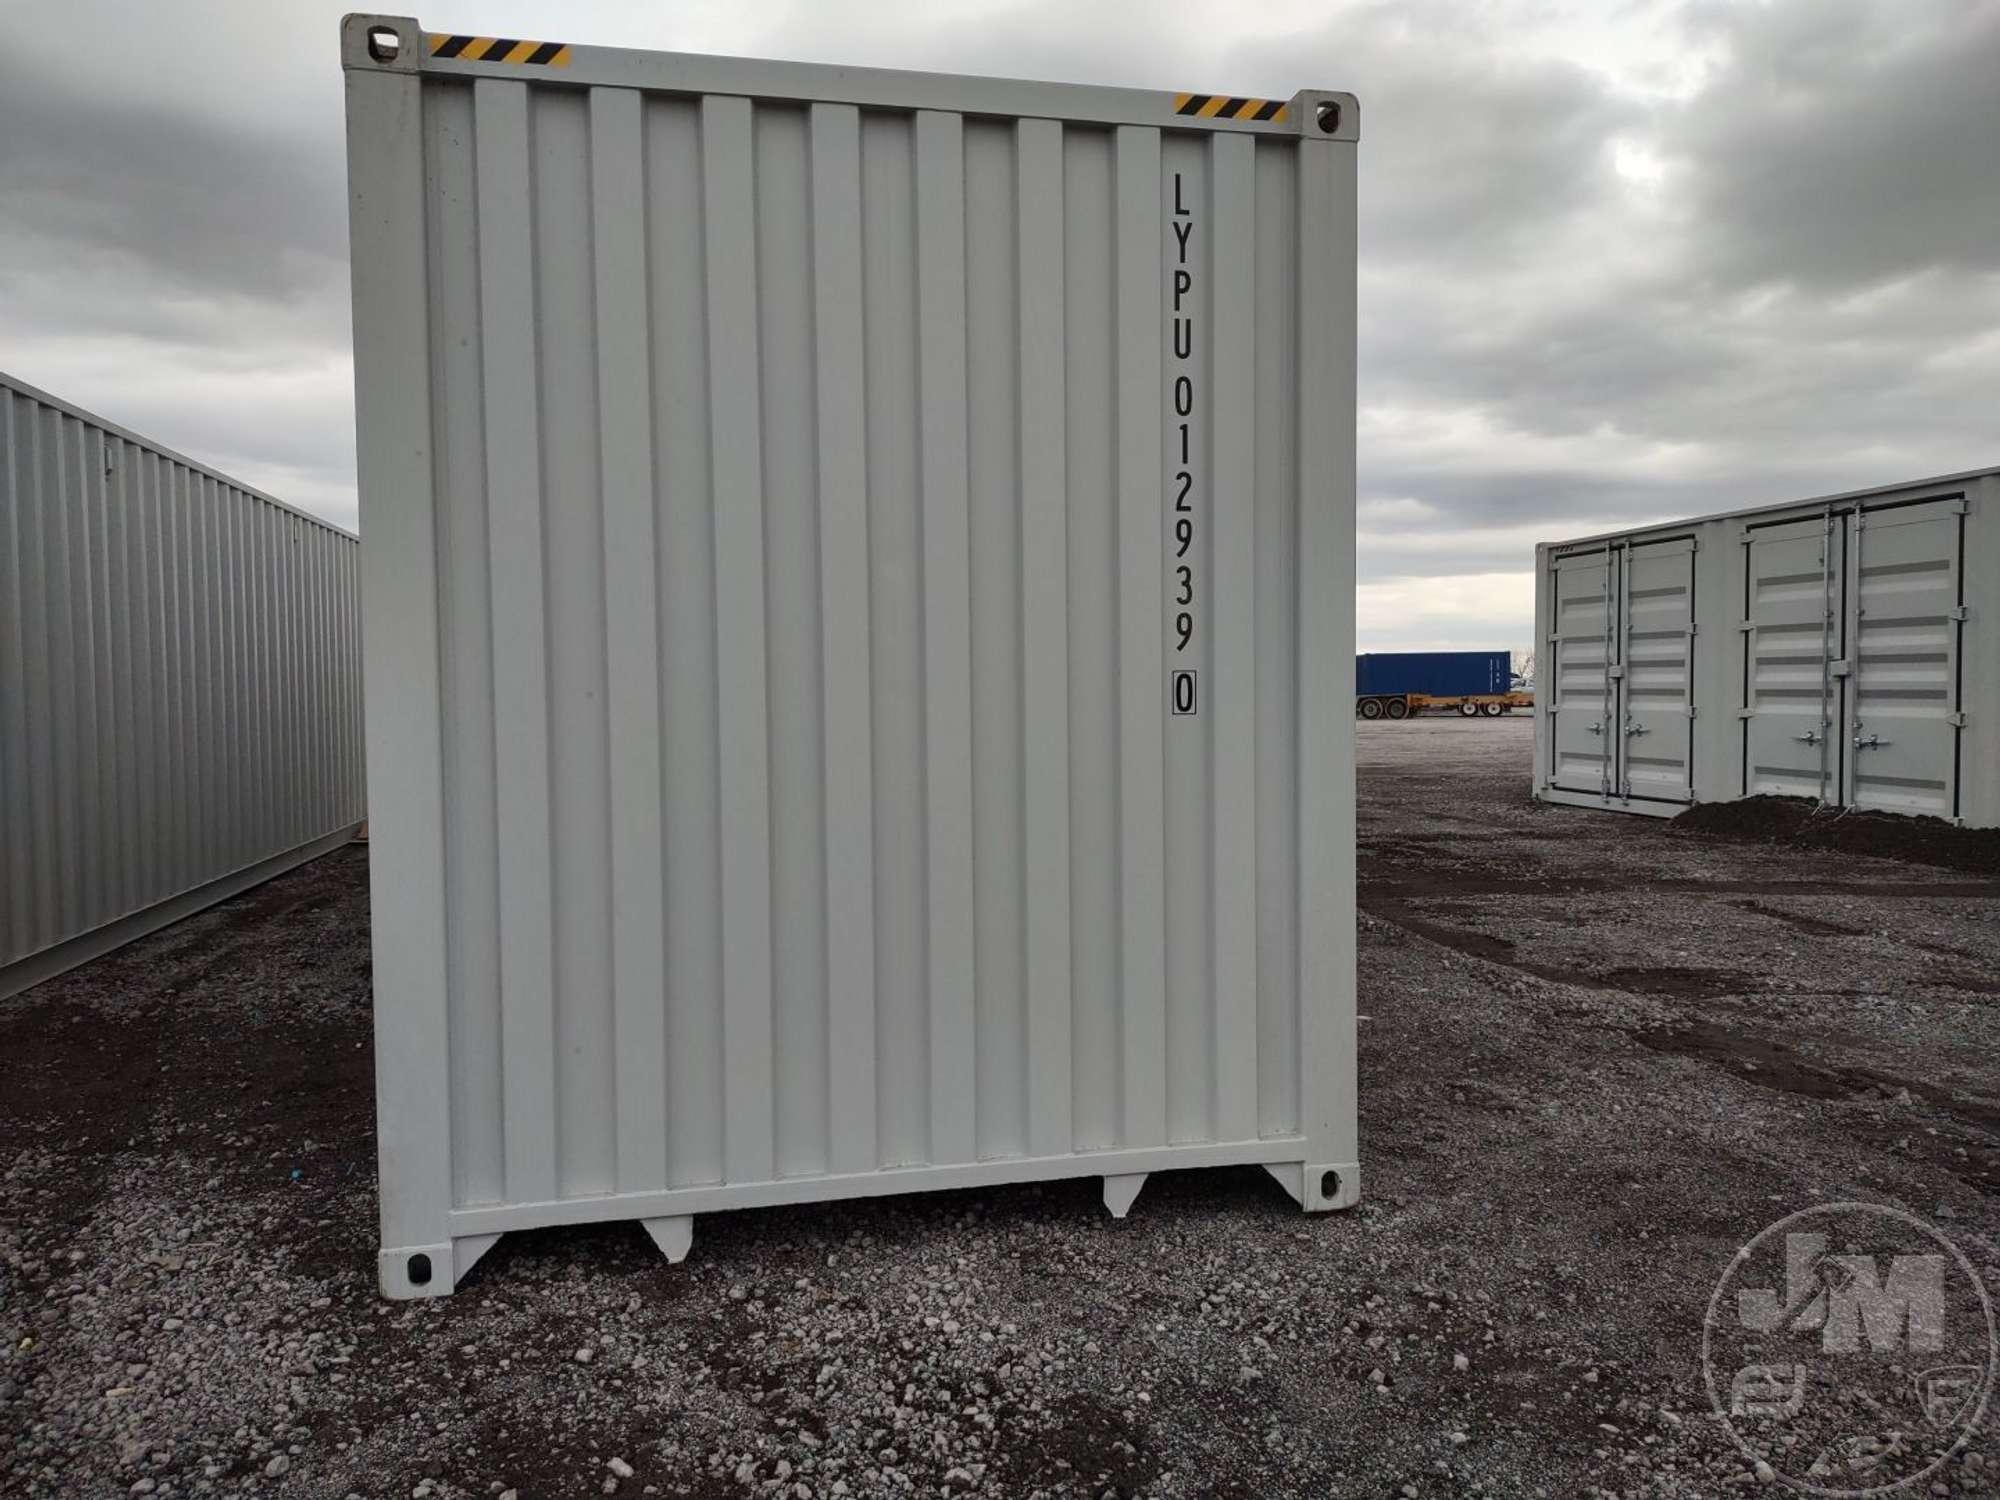 2023 LYPU 40' CONTAINER SN: 2340723